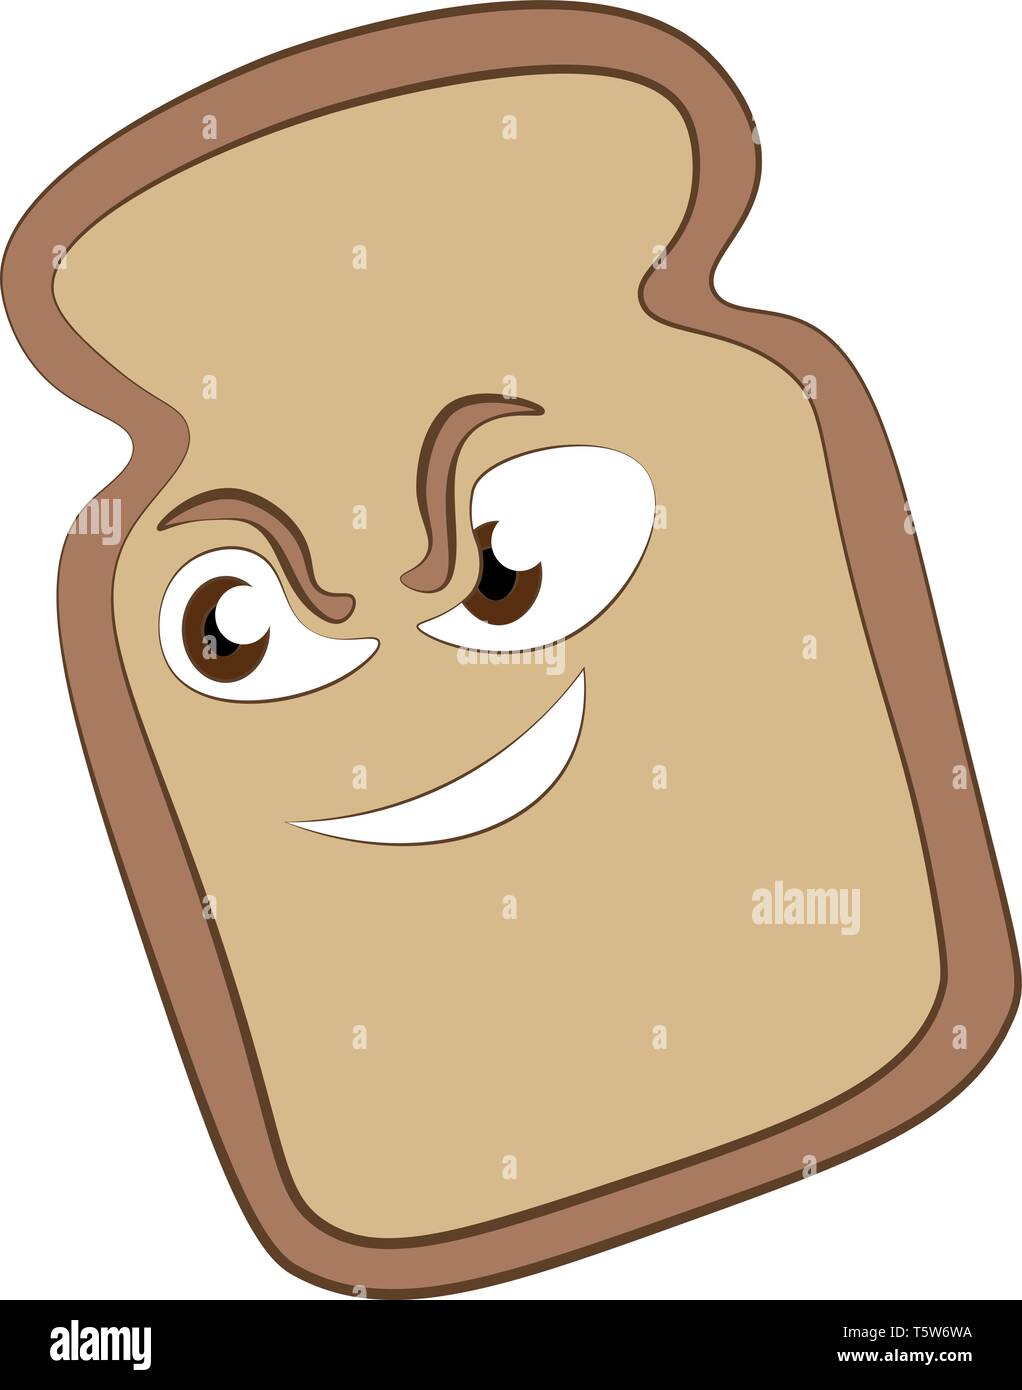 A bread slice with brown eyes and white teeth cartoon vector color drawing or illustration. Stock Vector